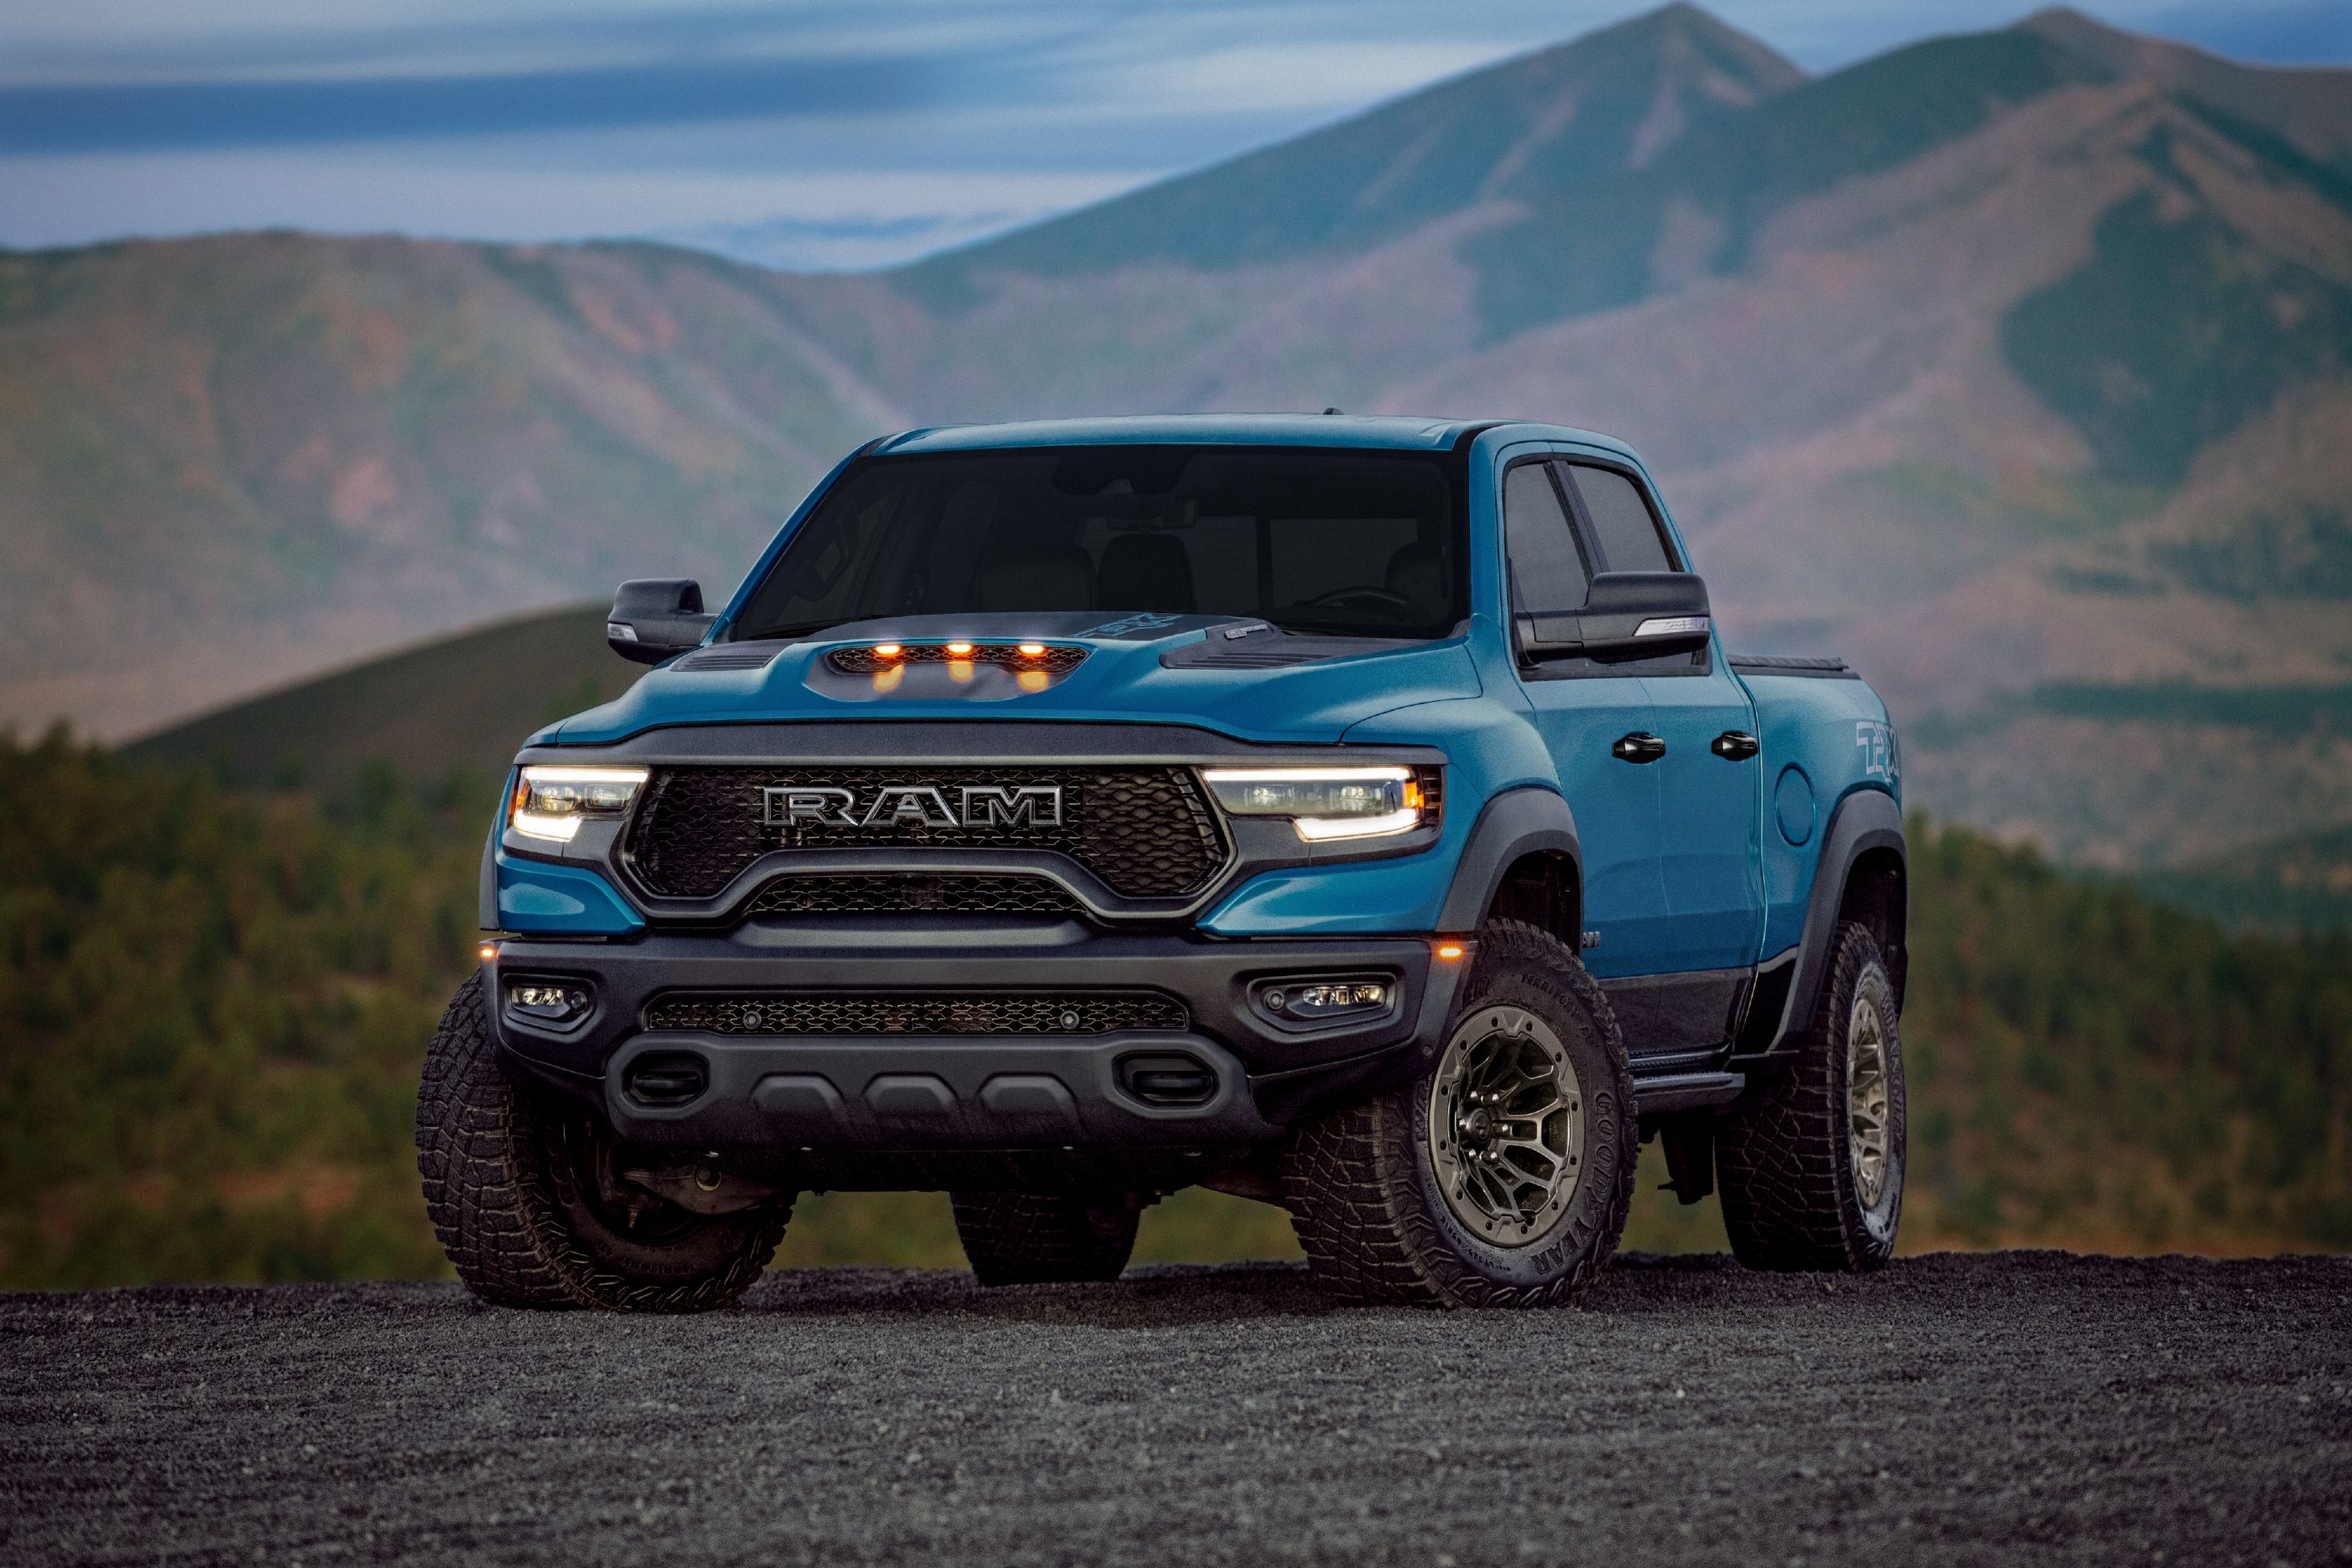 The Complete Ram Vehicle Lineup